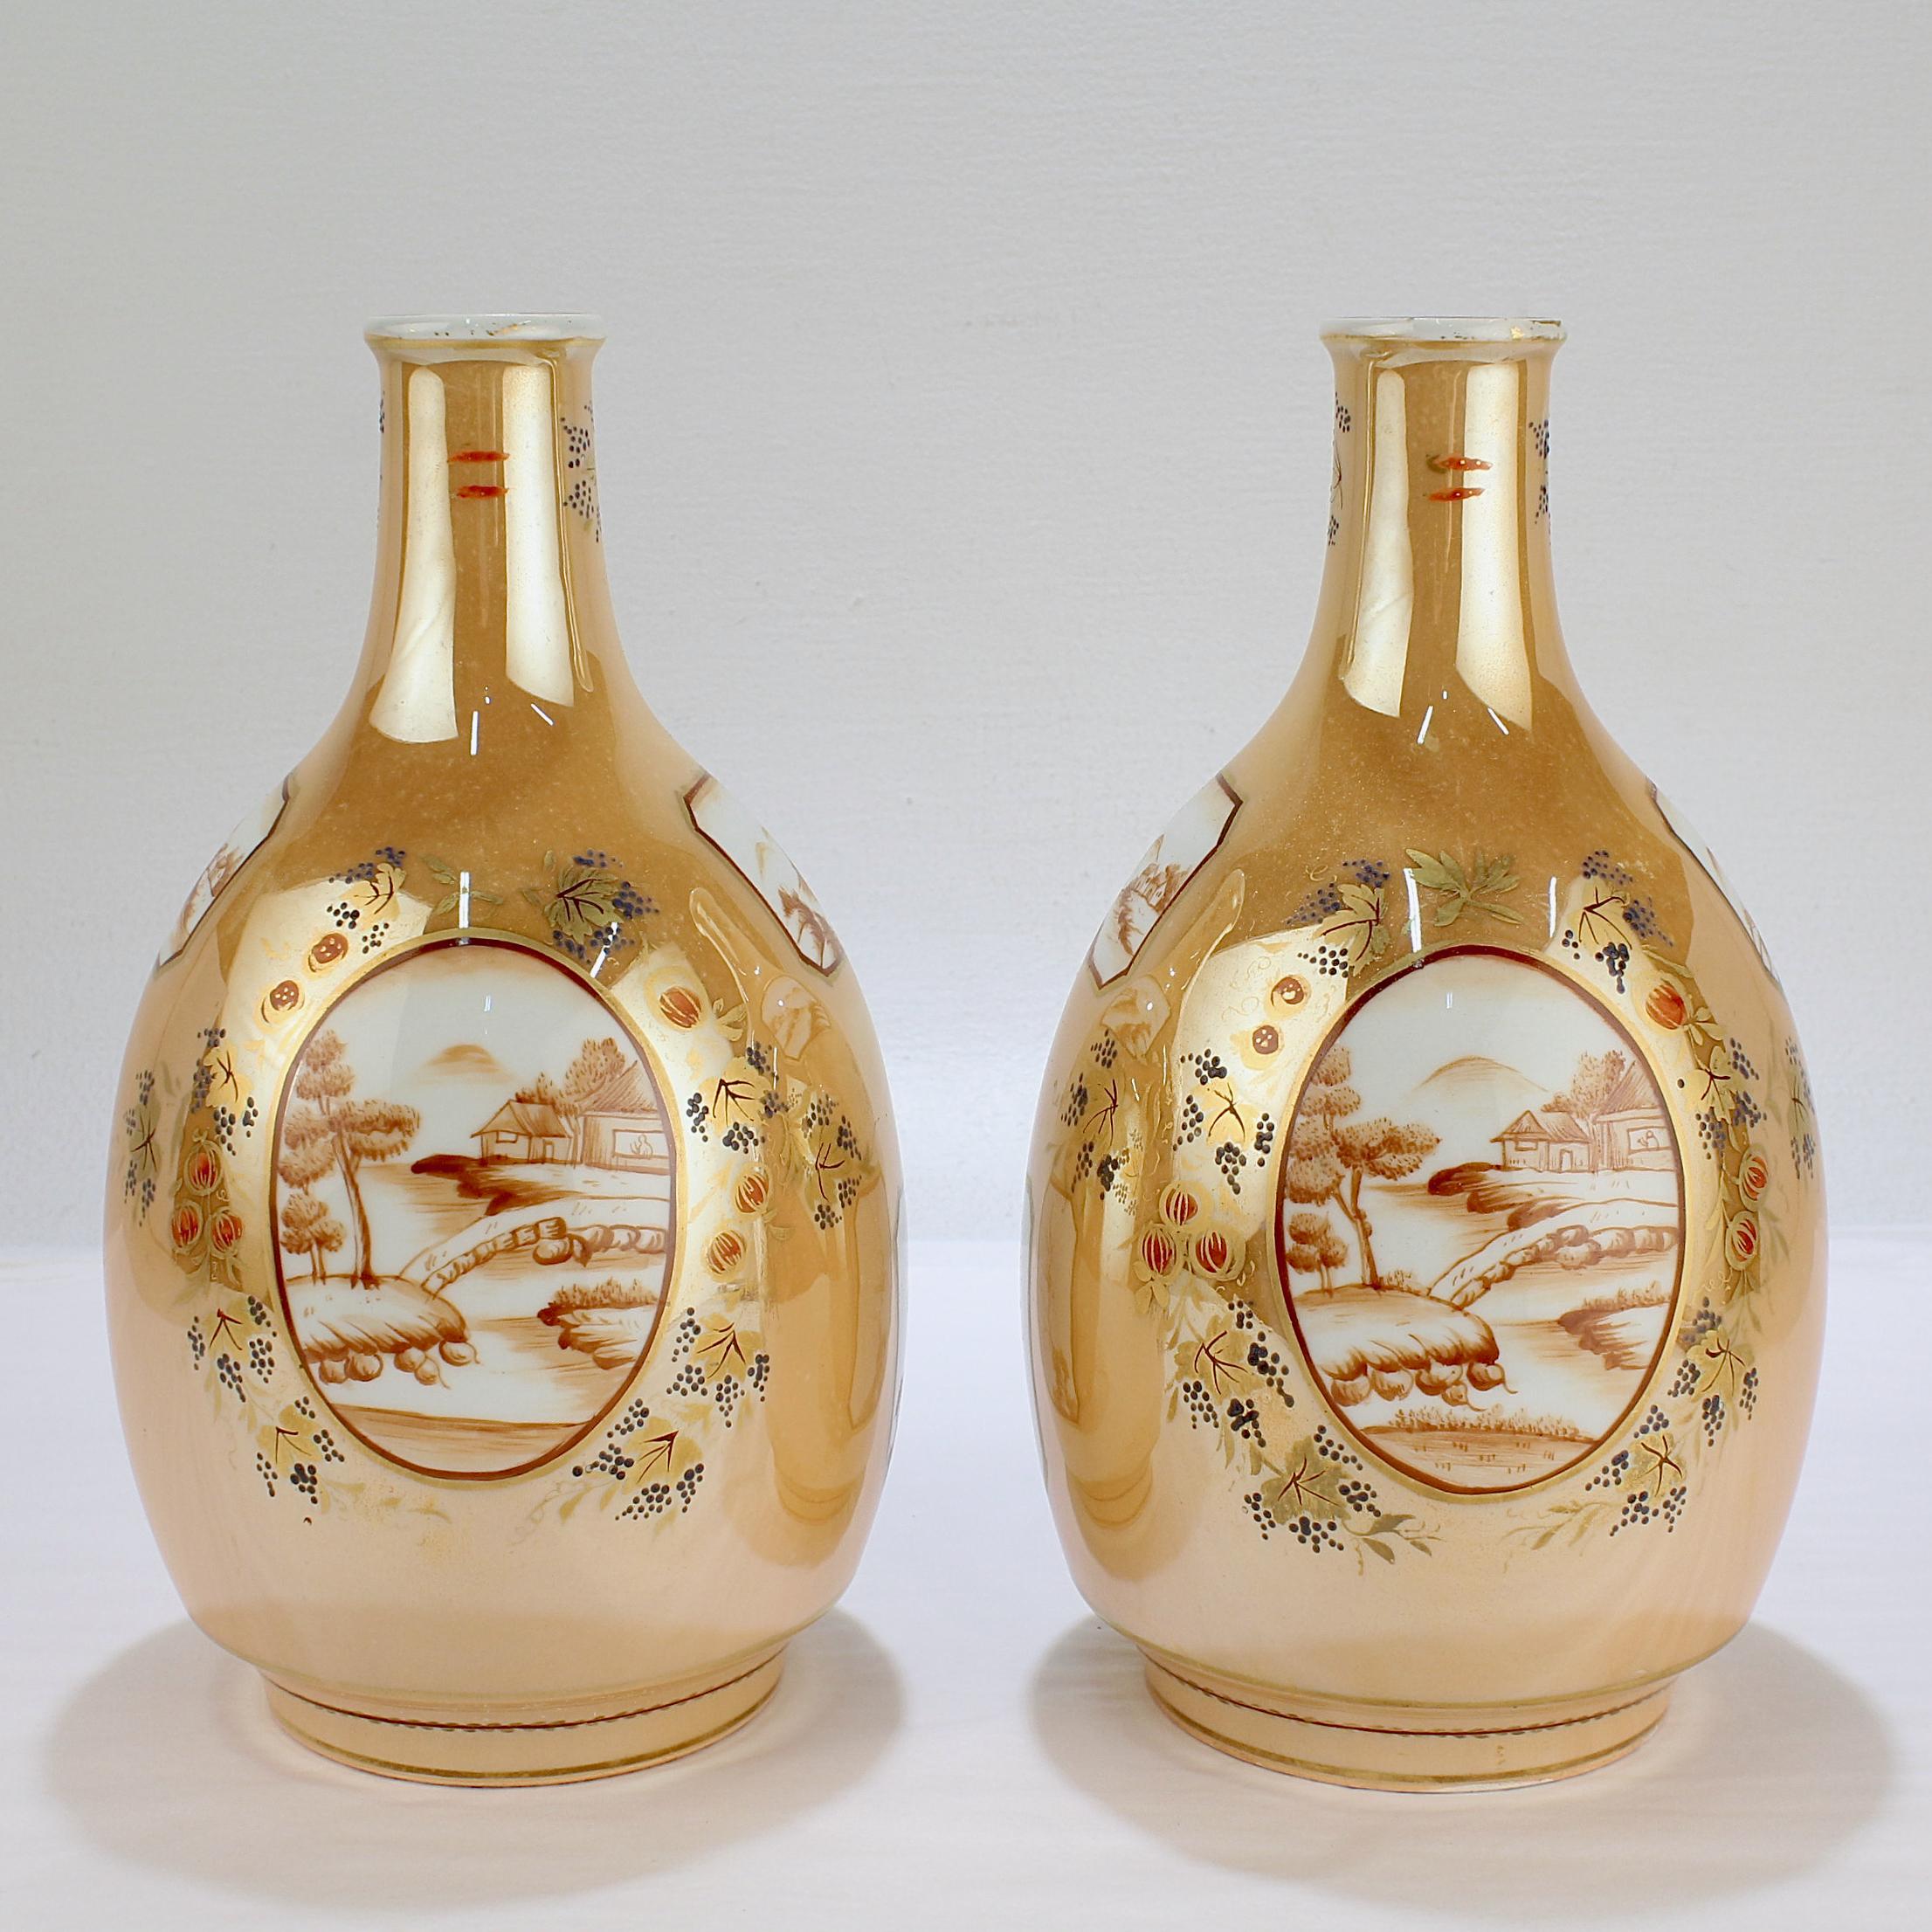 Pair of Antique Samson Porcelain Chinese Export Style Bottle Vases In Good Condition For Sale In Philadelphia, PA